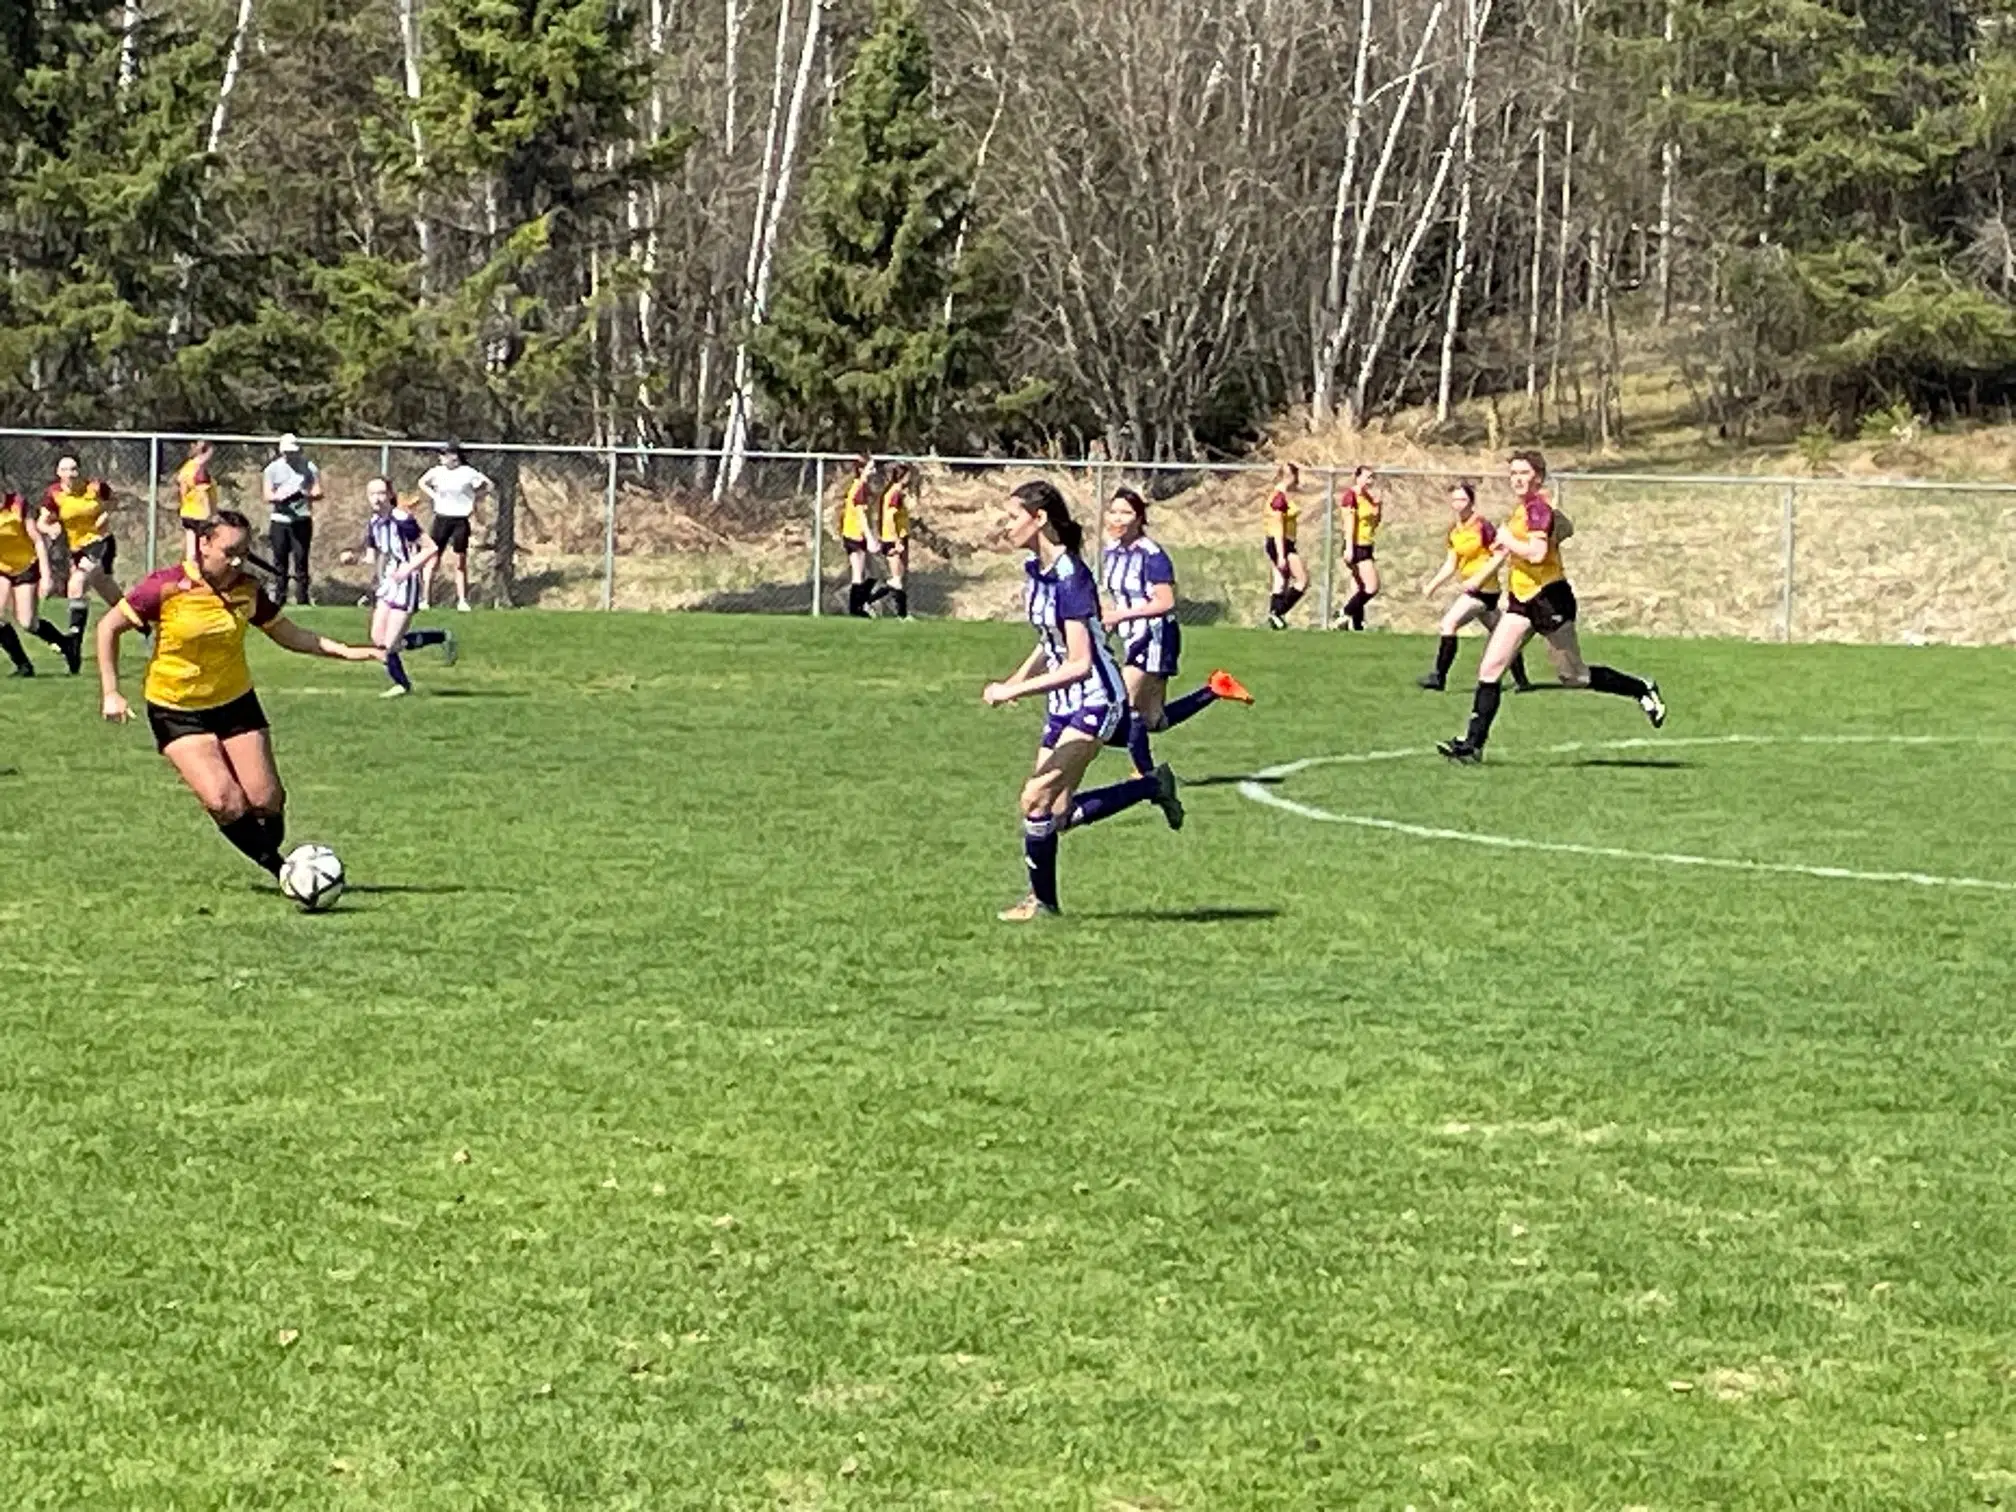 Results from week 2 of the NorWOSSA soccer season